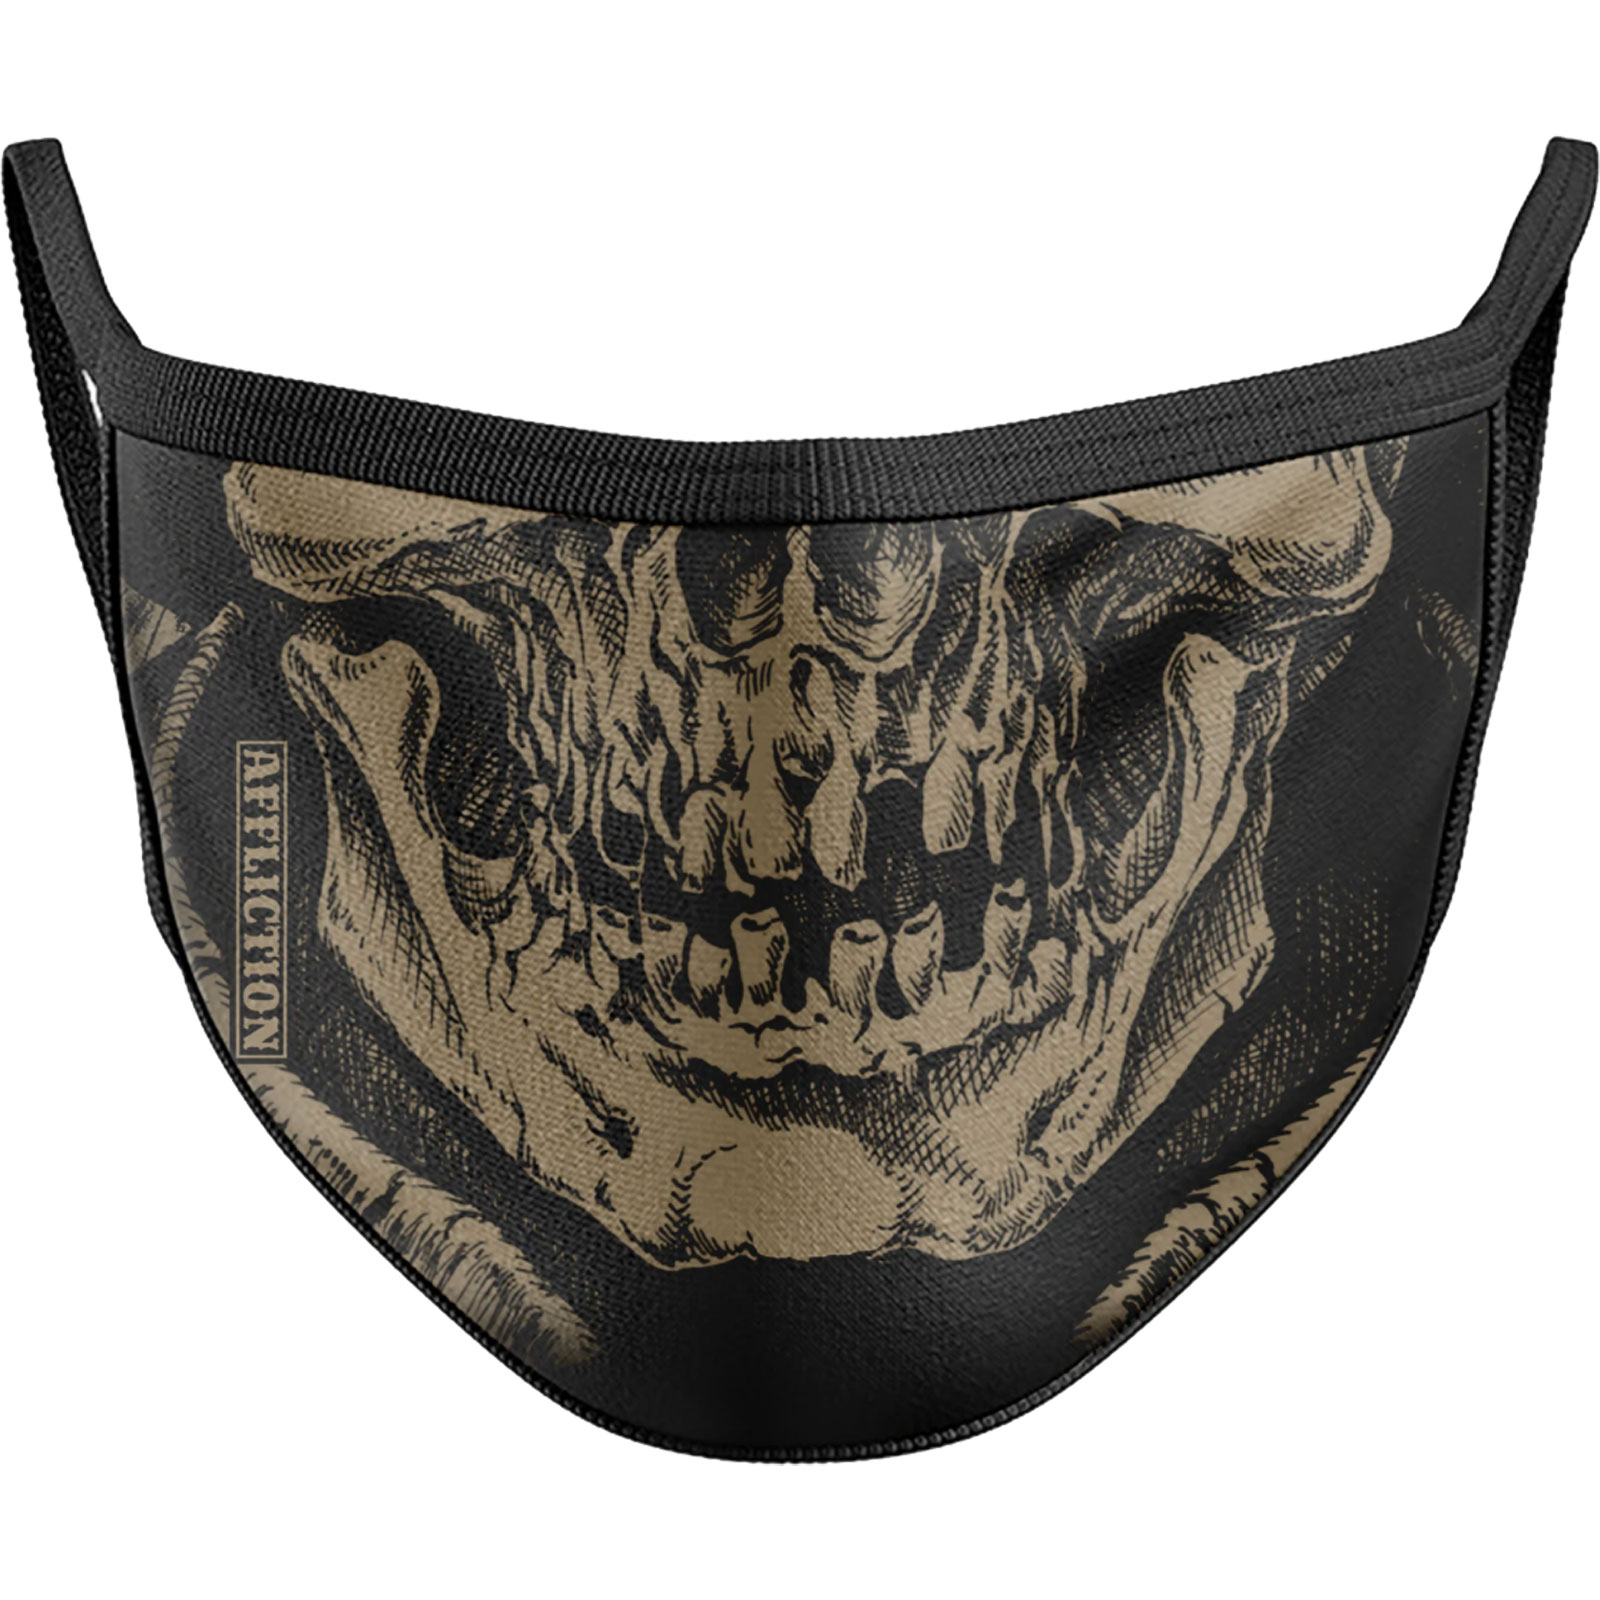 Affliction Conjuring Face Mask with detailed print and logo lettering